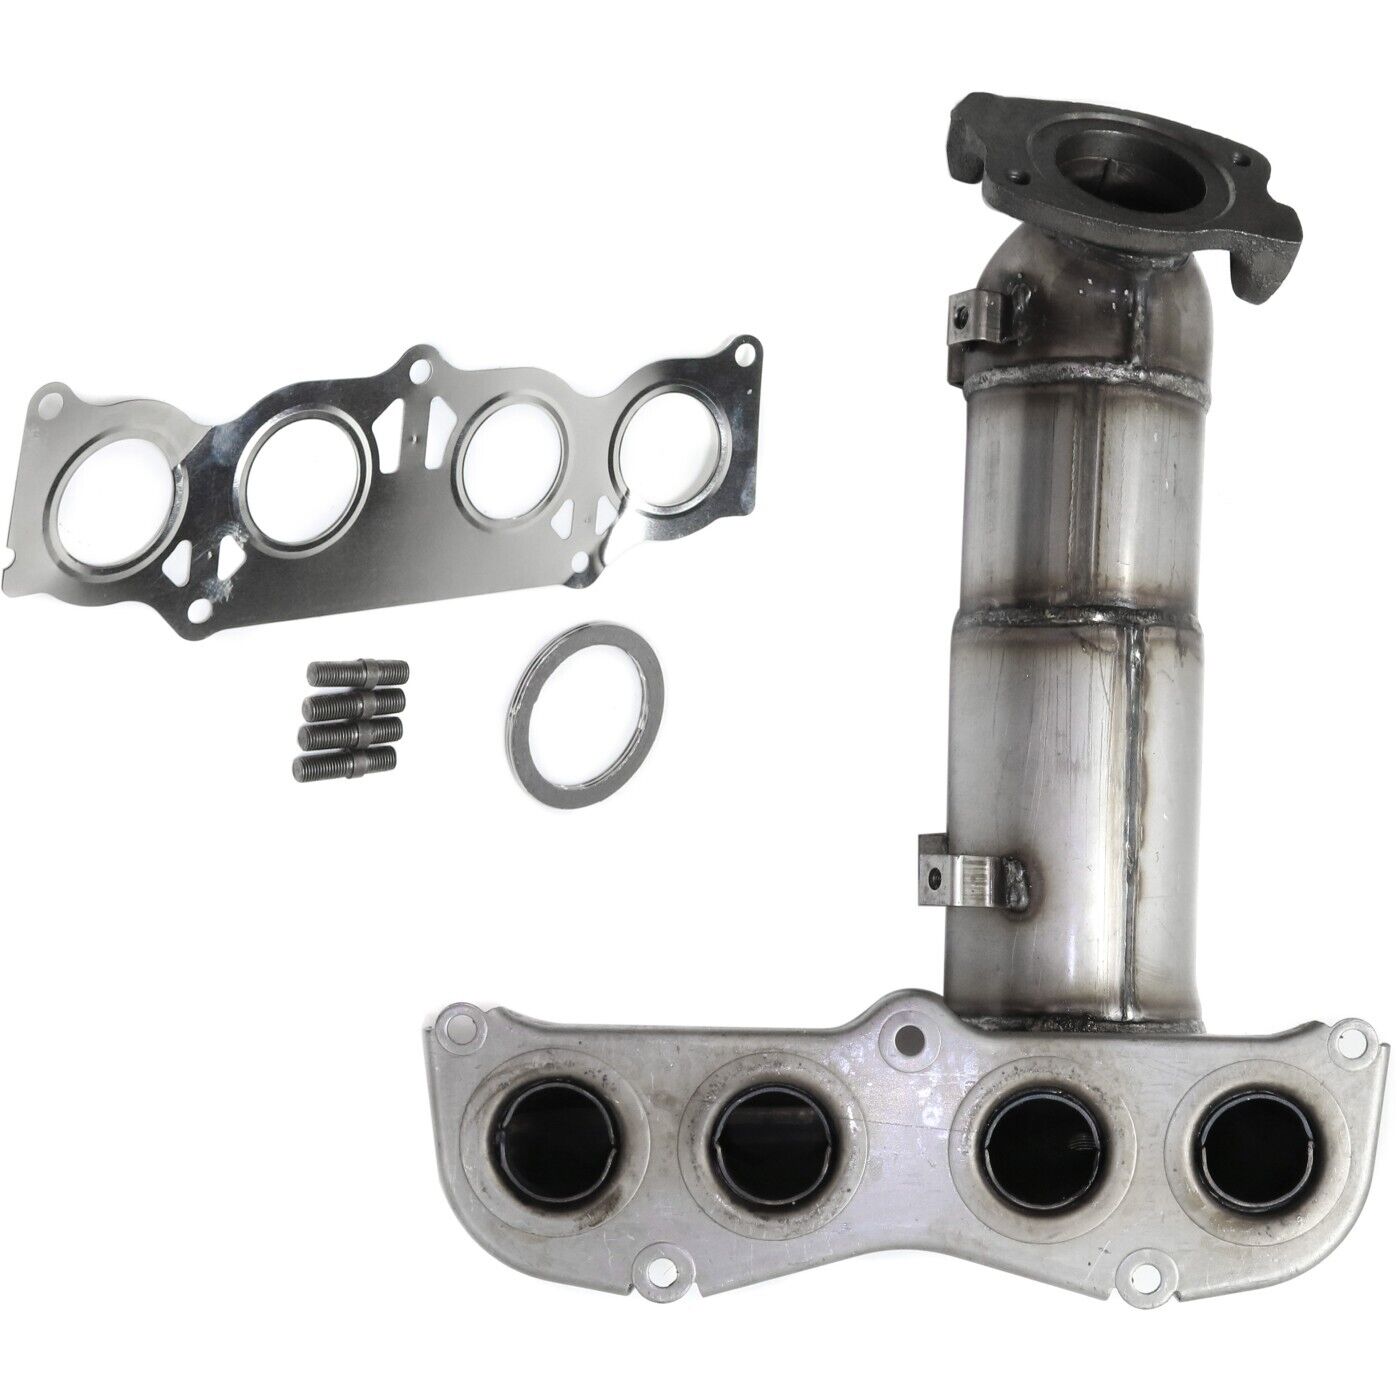 Catalytic Converter Front 46-State Legal For 07-09 Camry 2.4L with PZEV Emission